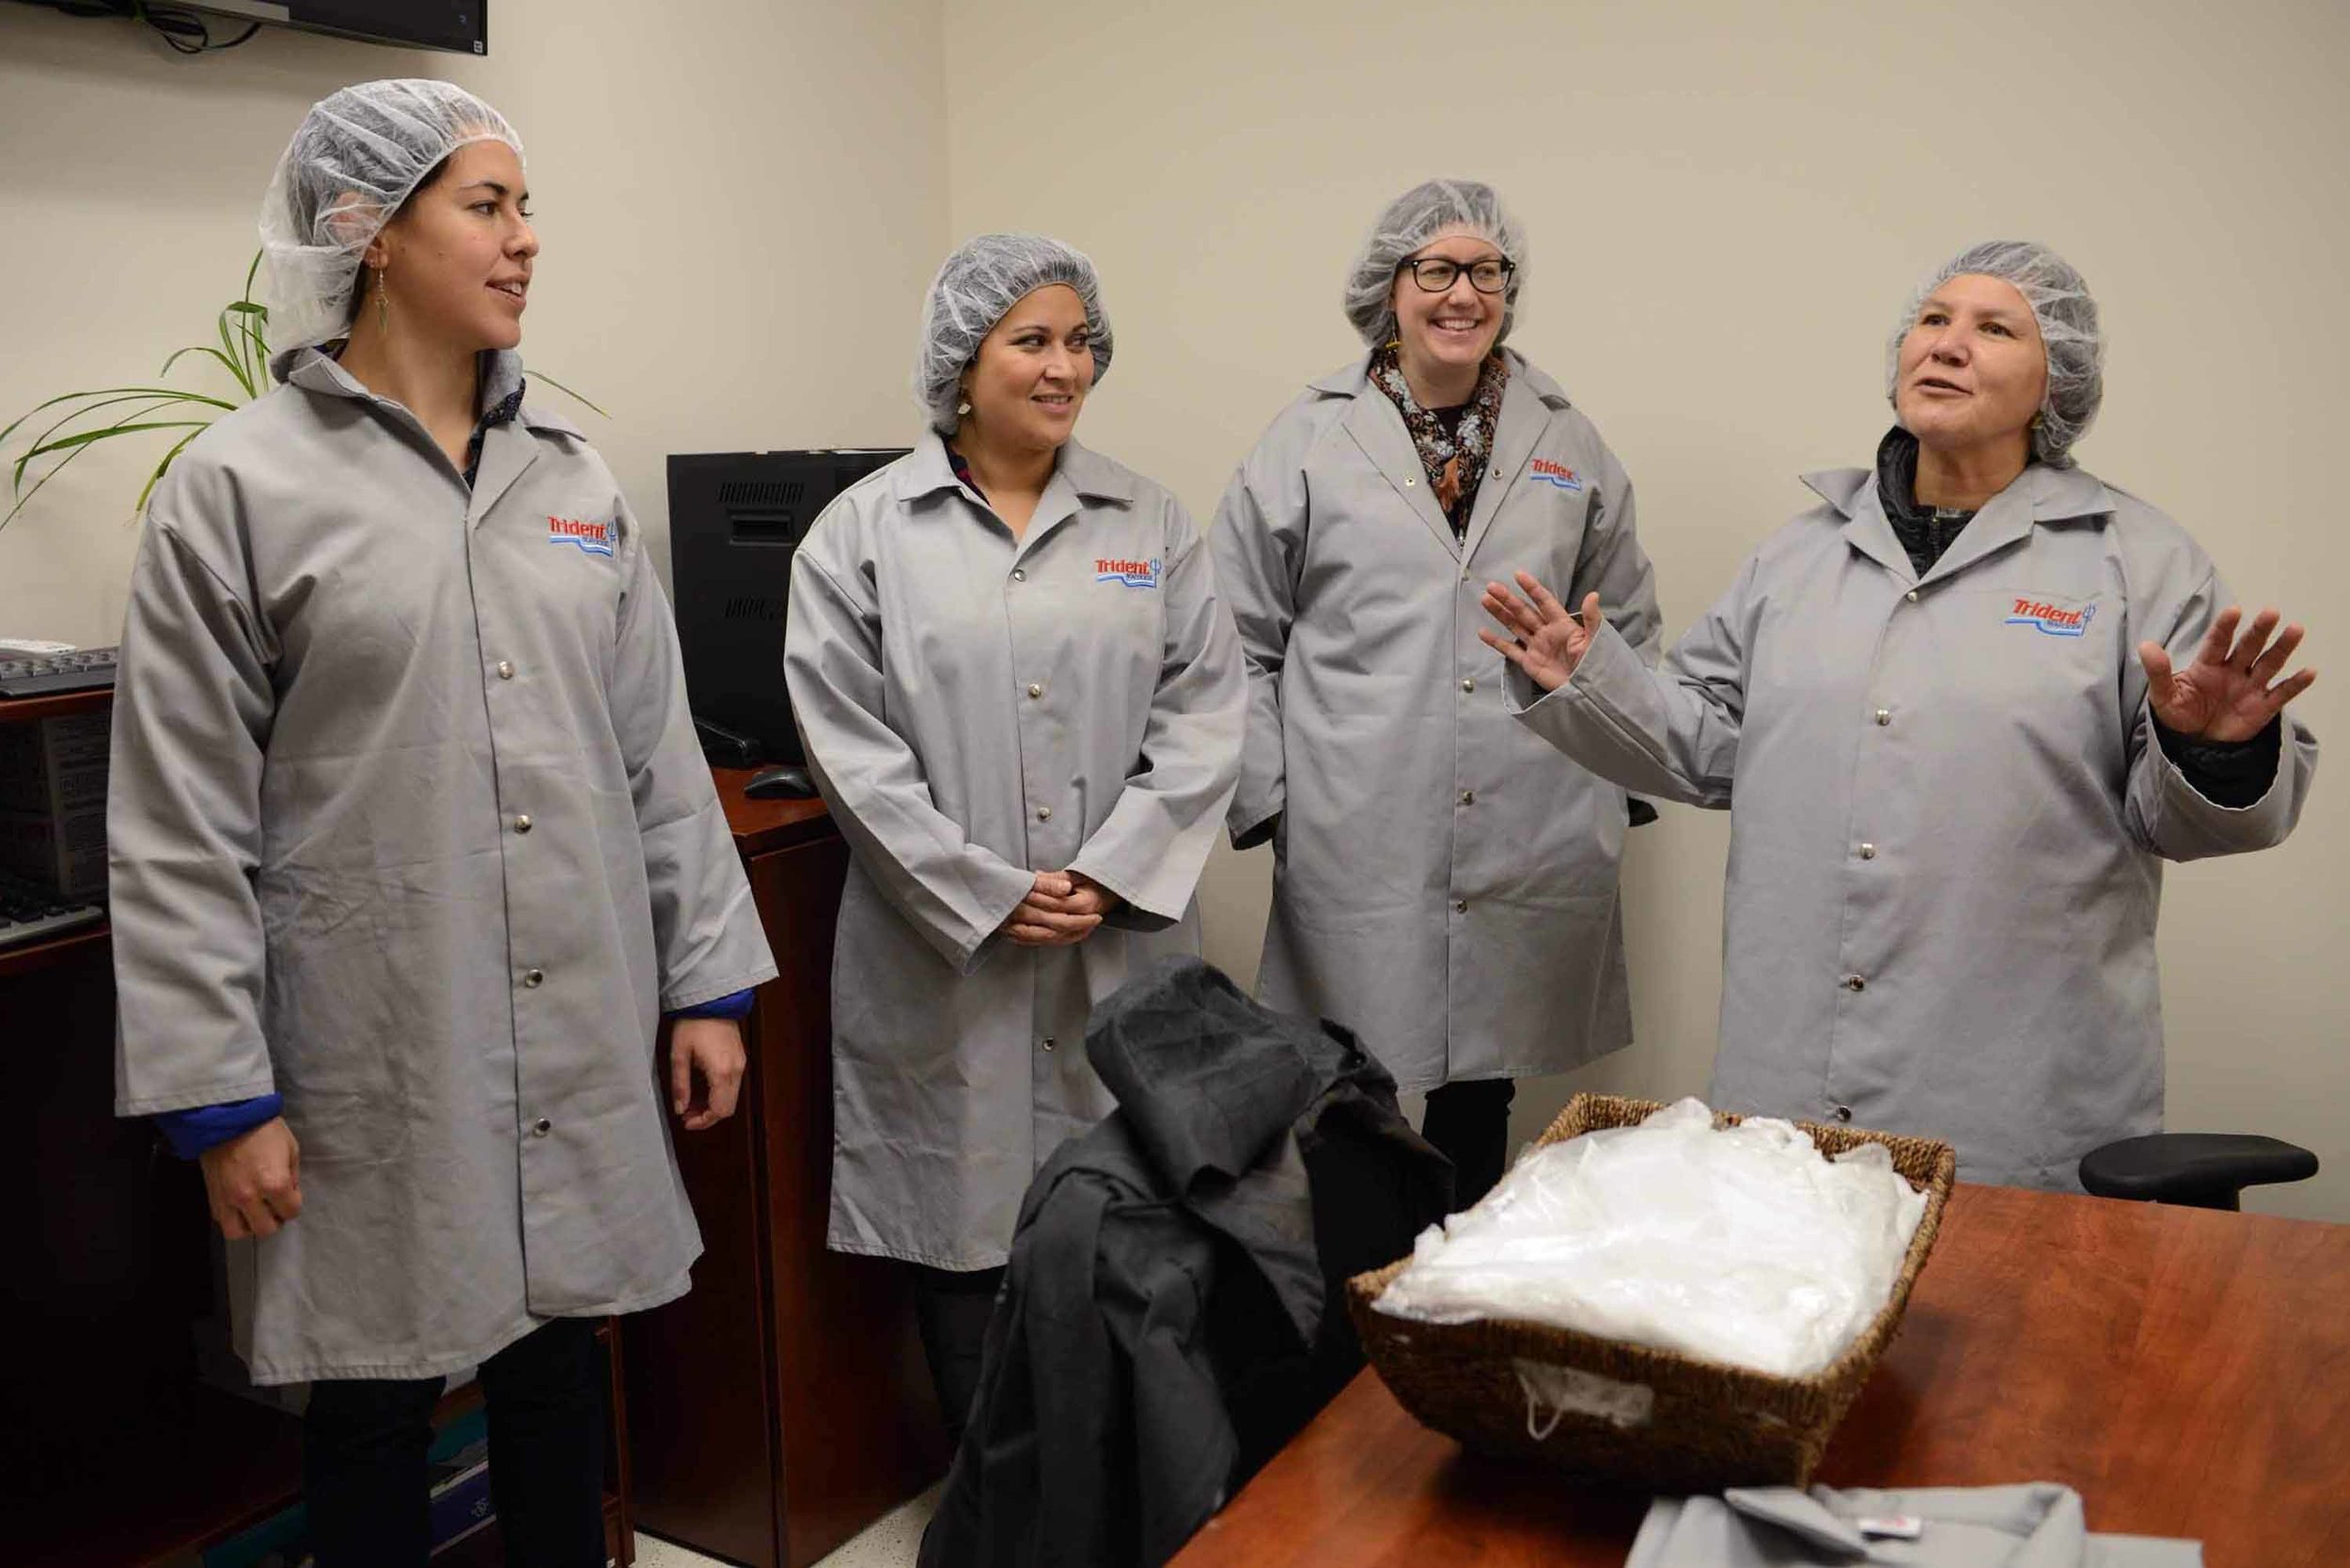  Lt. Governor Valerie Davidson, Communications Director Amanda Moser, Director of Native and Rural Affairs Barbara Blake, and Special Assistant Anna Clock dress for success and a tour of the Trident Seafood processing plant in Kodiak. November 2018. 